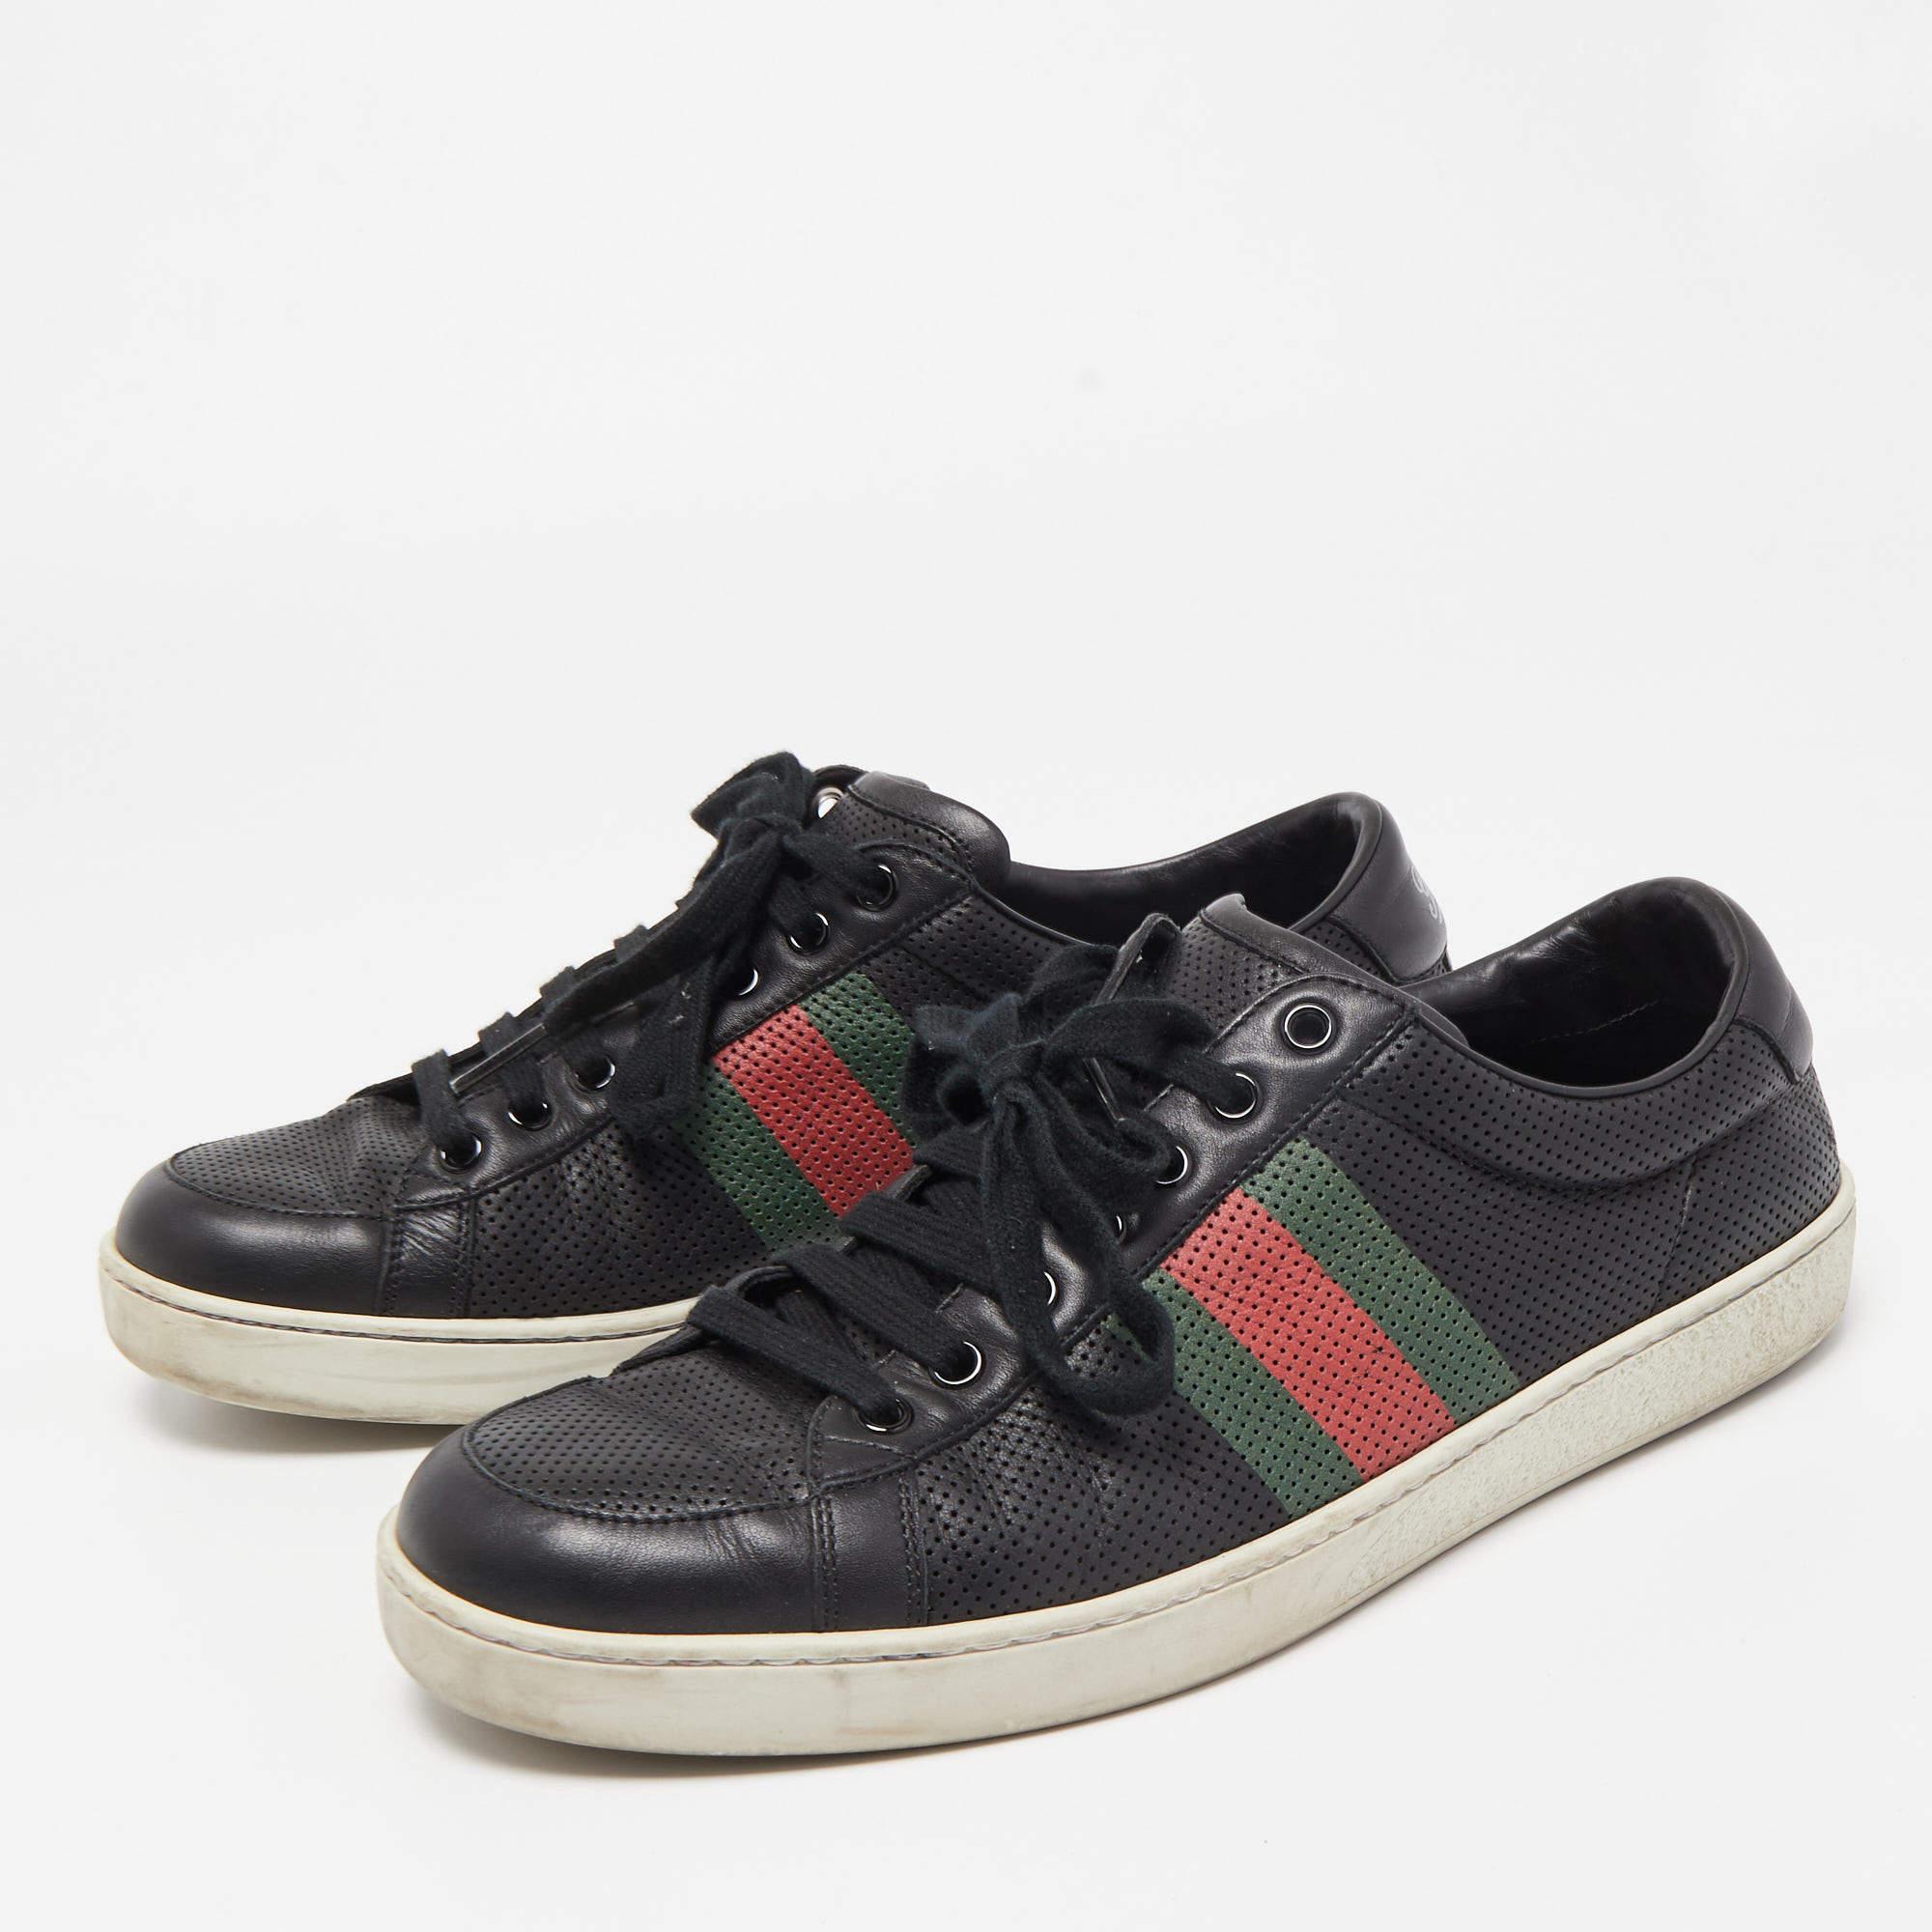 Gucci Black Perforated Leather Web Detail Low Top Sneakers Size 42.5 en vente 4